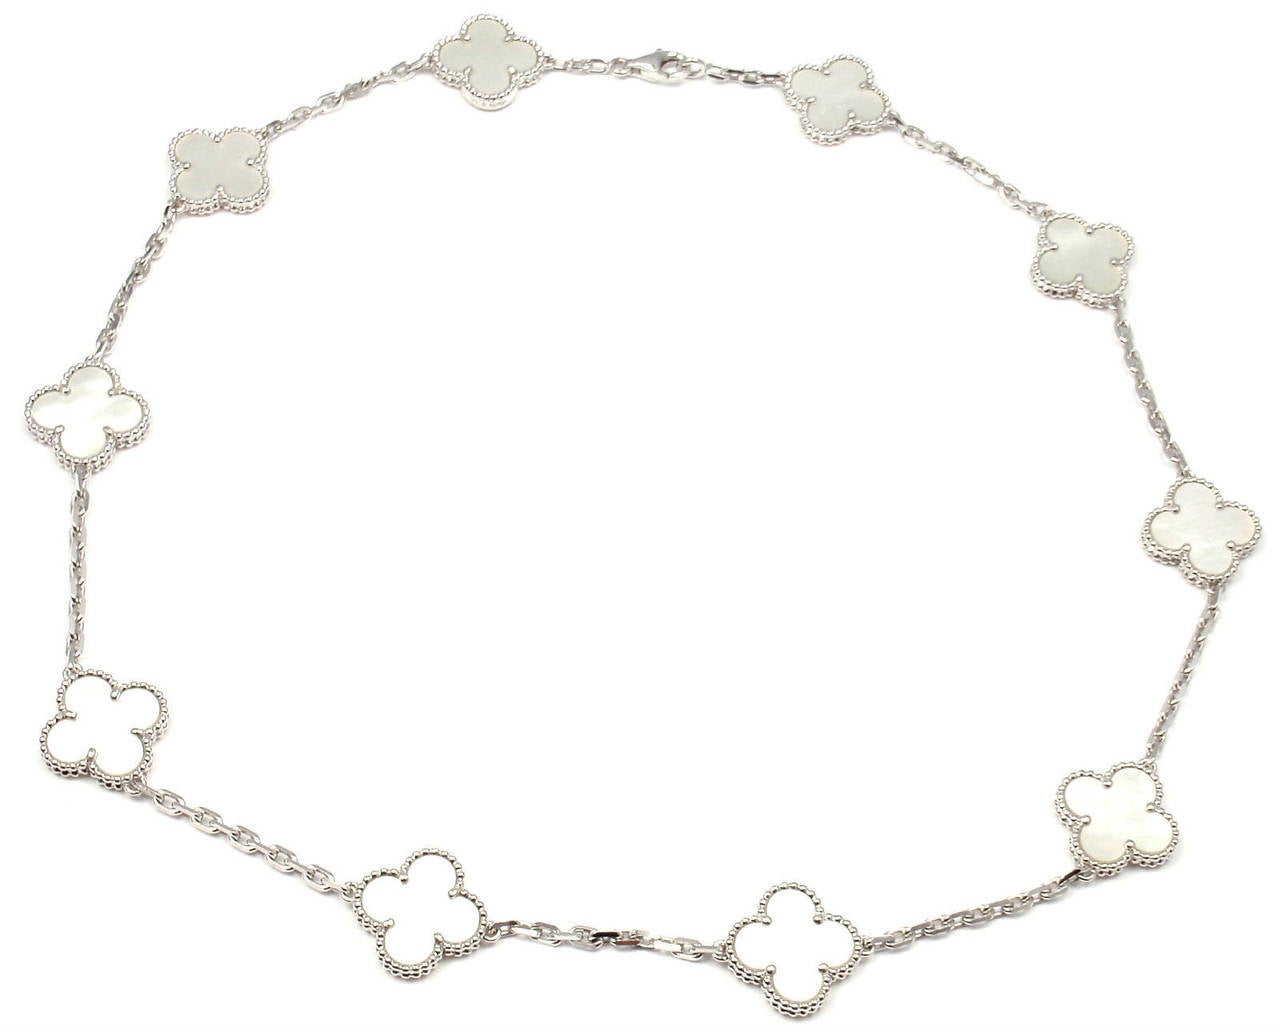 18k White Gold Alhambra 10 Motifs Mother Of Pearl Necklace by
Van Cleef & Arpels.
With 10 motifs of mother of pearl Alhambra stones 15mm each.
This necklace comes with Van Cleef & Arpels certificate.

Details:
Length: 16